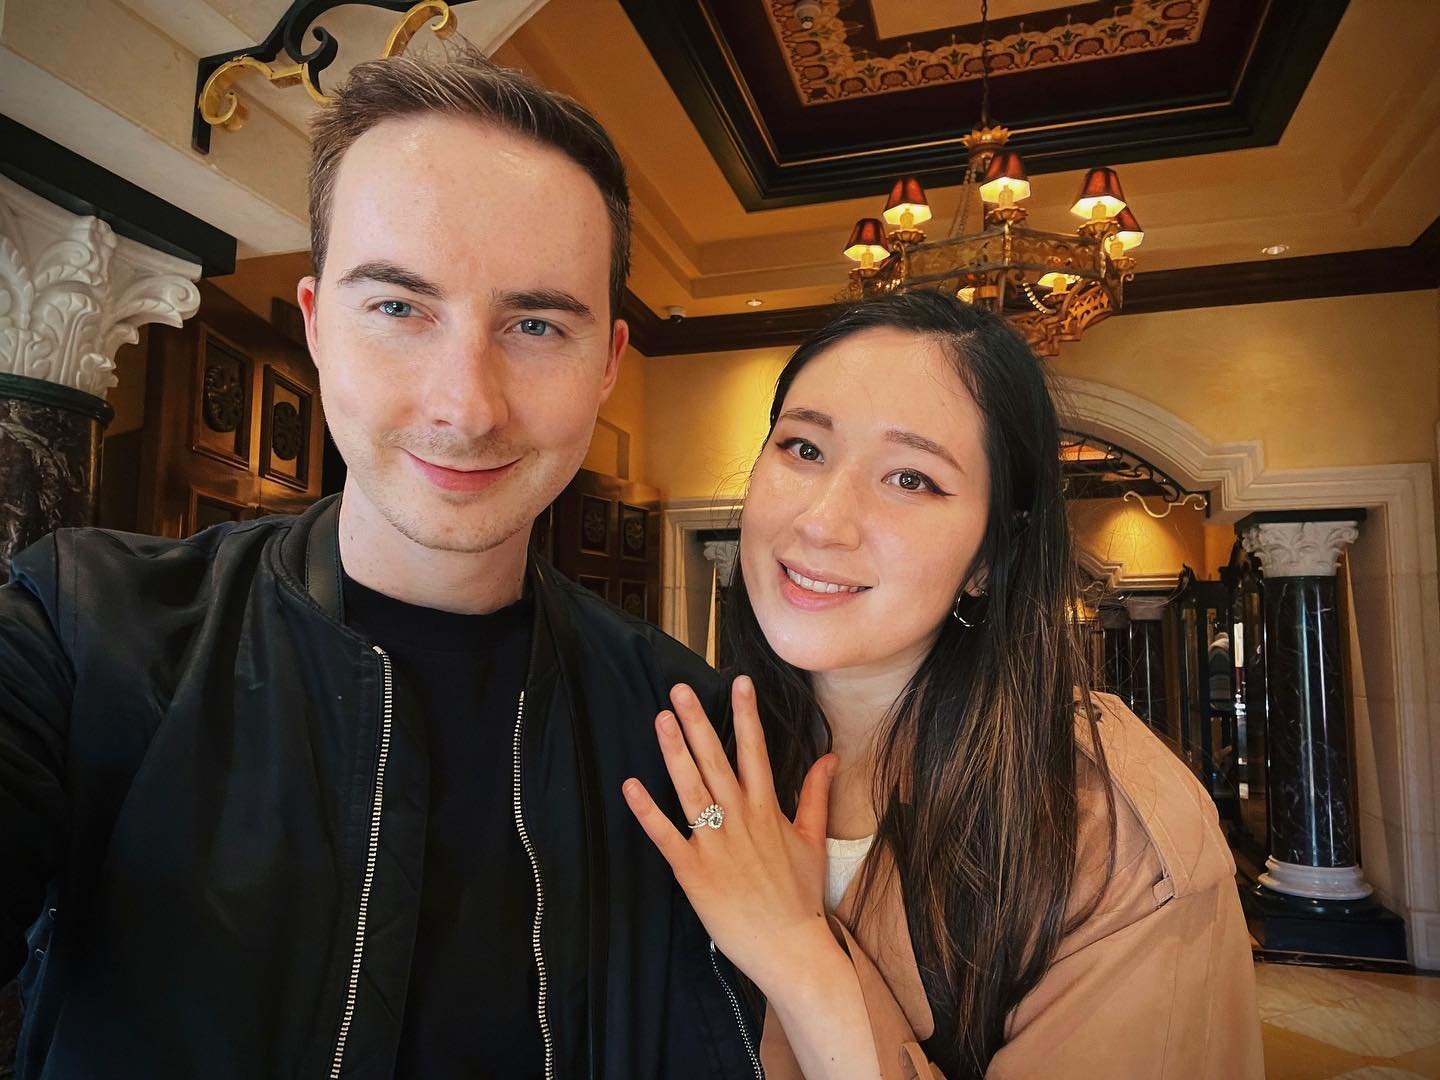 She said yes!!!

My journey with Alessandra started during the pandemic and life hasn&rsquo;t been the same since.

I&rsquo;m a very lucky man 💍